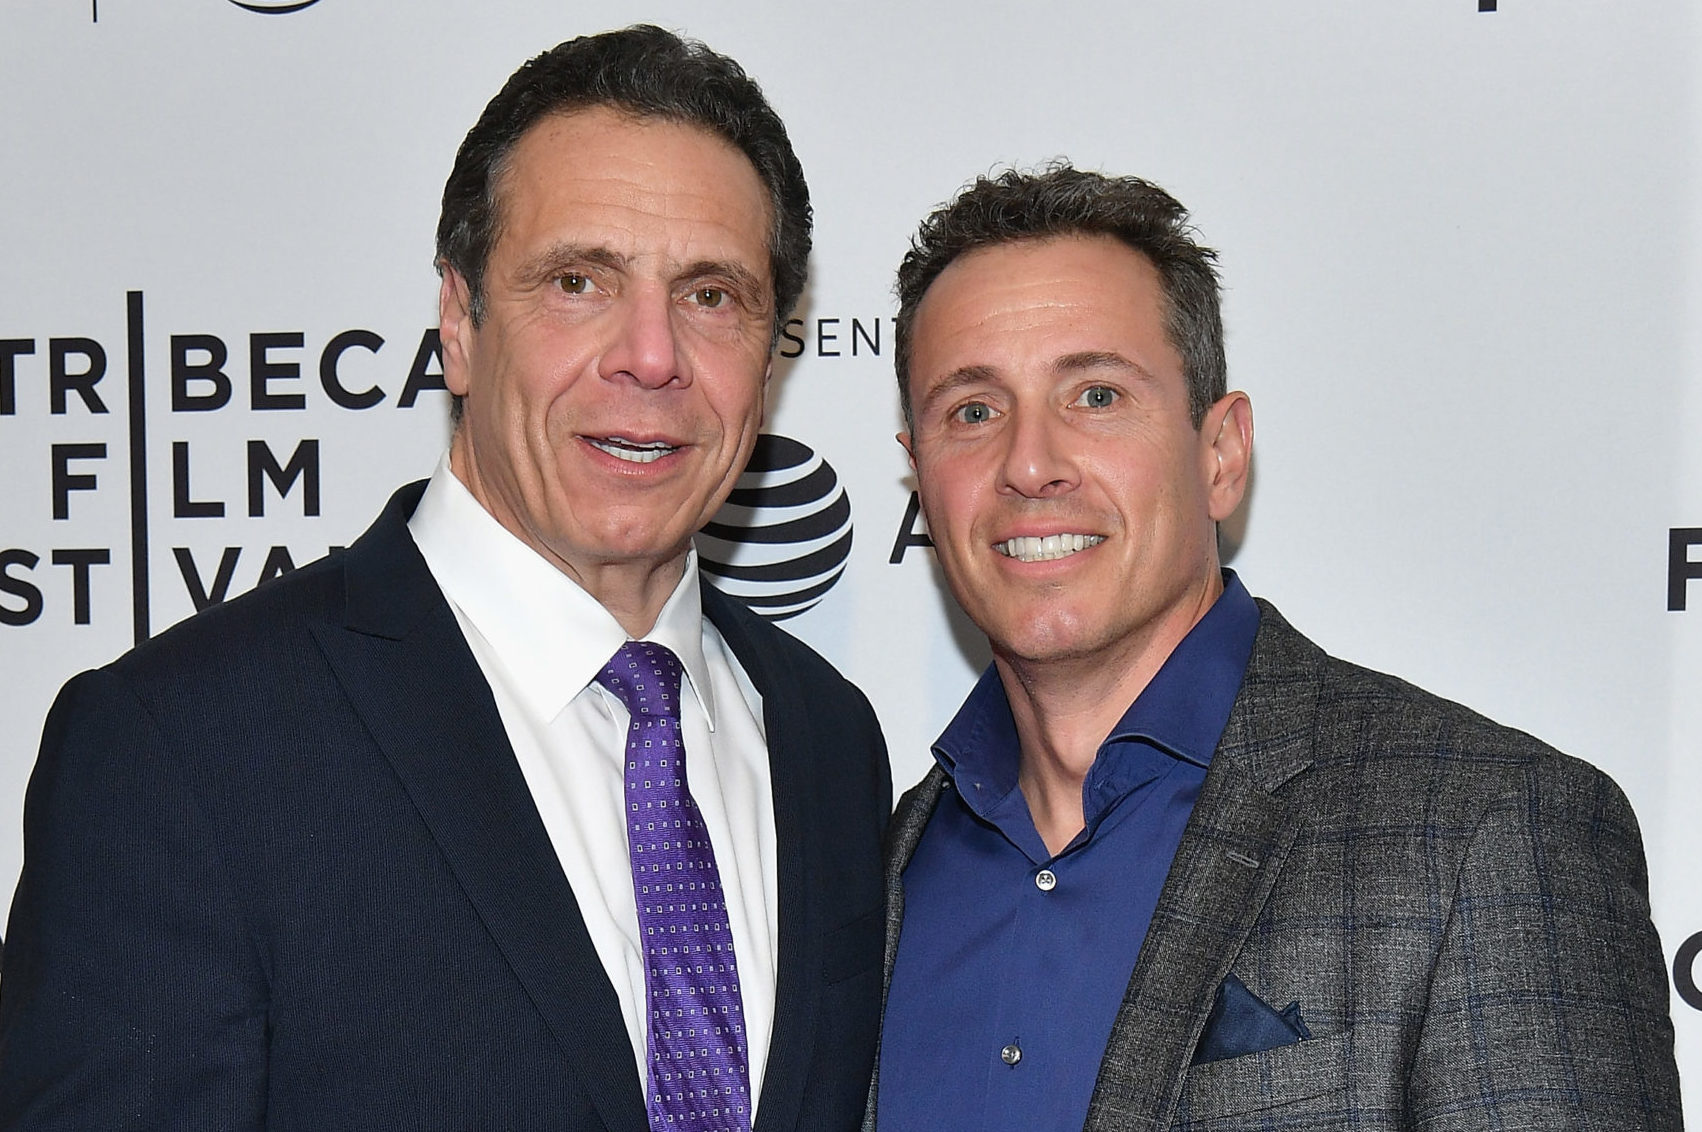 The brothers Cuomo | Spectator USA